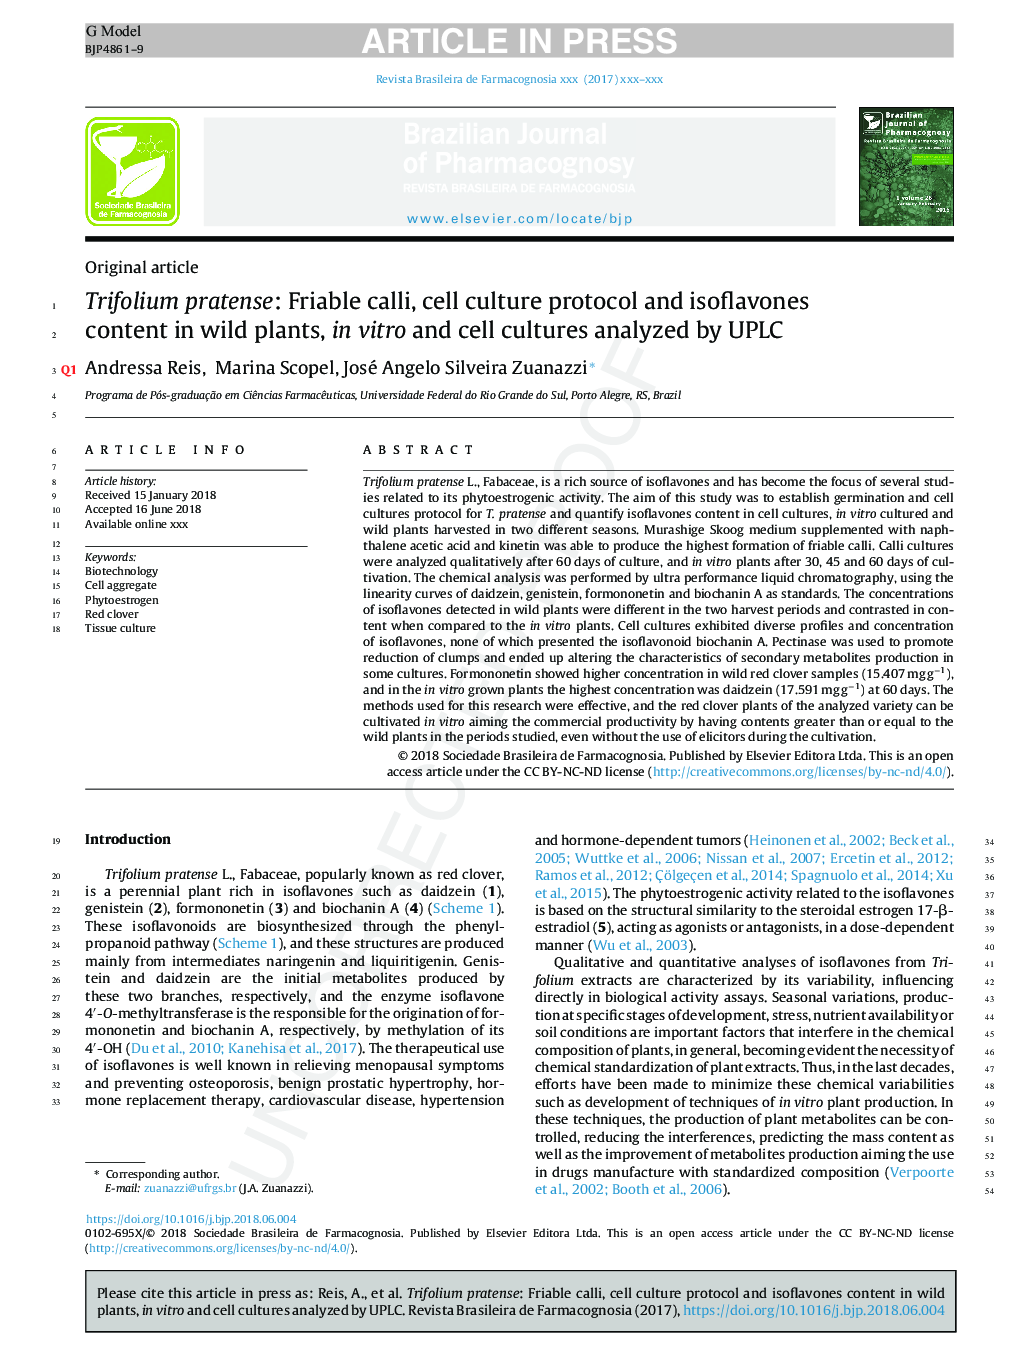 Trifolium pratense: Friable calli, cell culture protocol and isoflavones content in wild plants, in vitro and cell cultures analyzed by UPLC